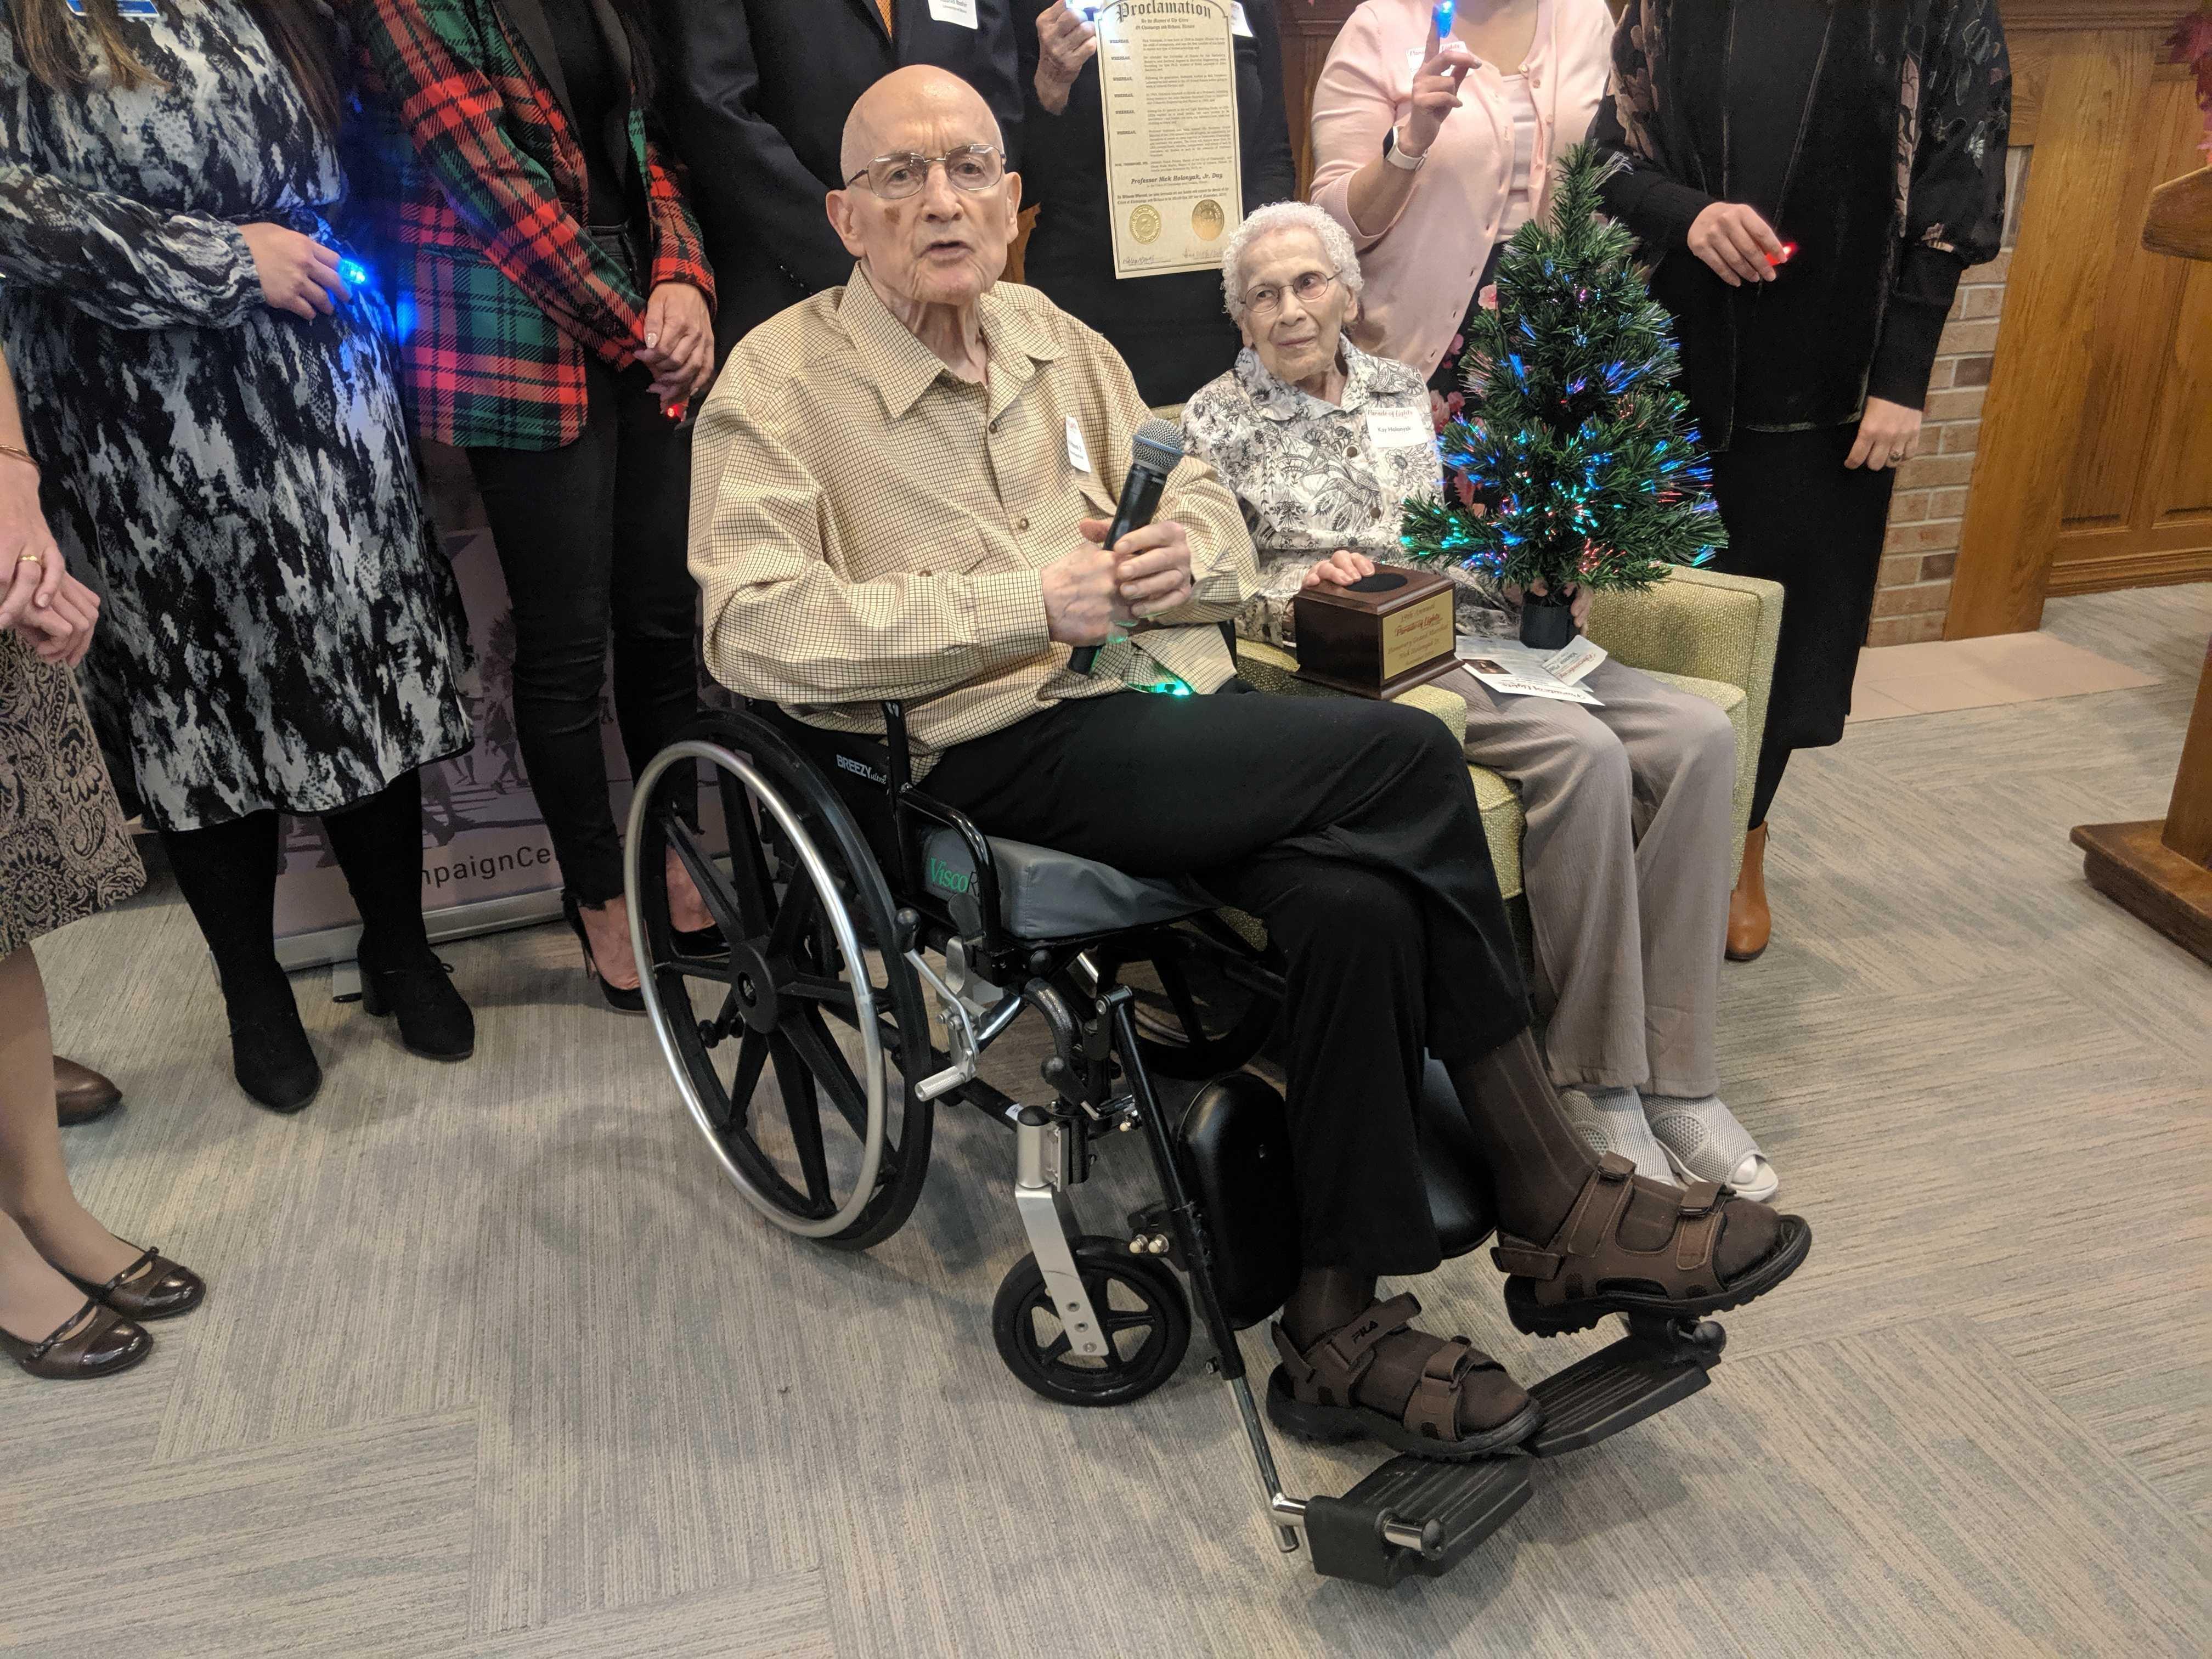 University of Illinois Professor Emeritus Nick Holonyak Jr. and his wife Kay seated with a fiber-optic Christmas tree in front of people standing behind them. 